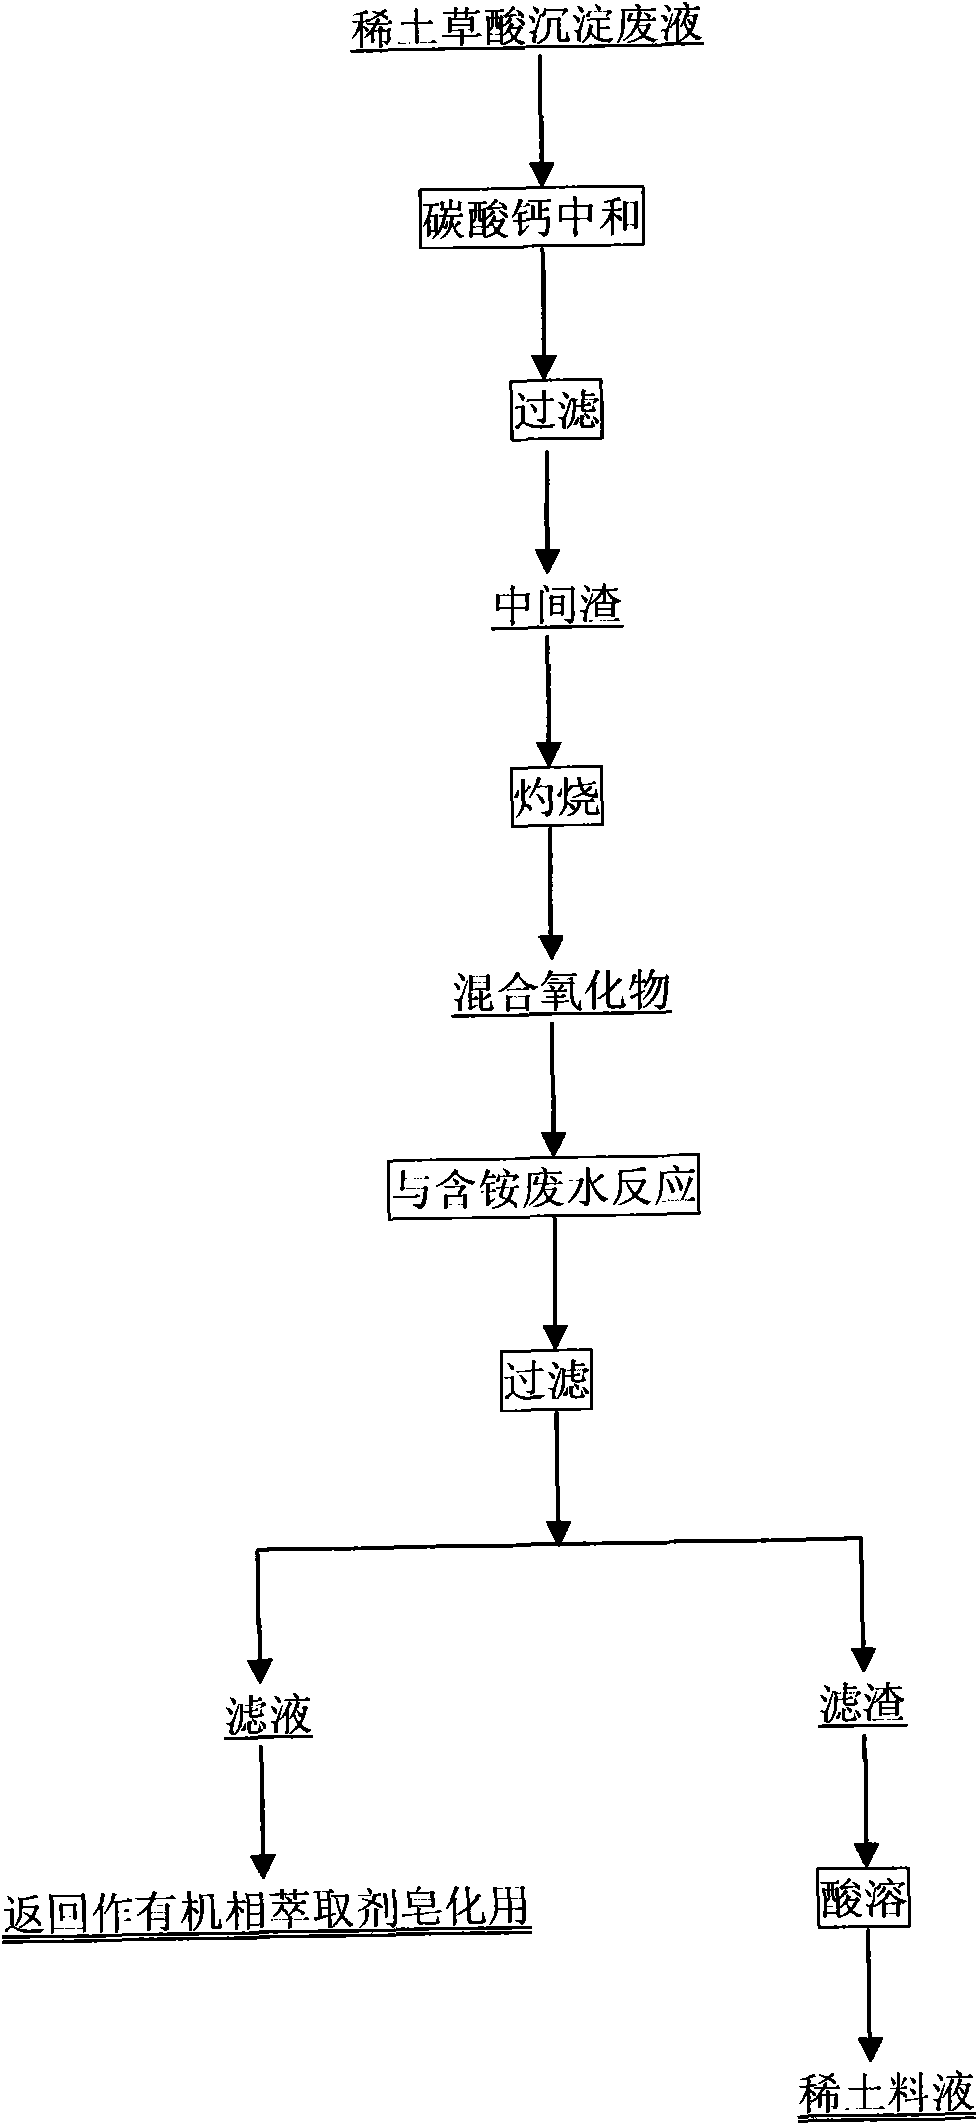 Method for simultaneously treating waste water and recovering rare earth of rare earth separation plant